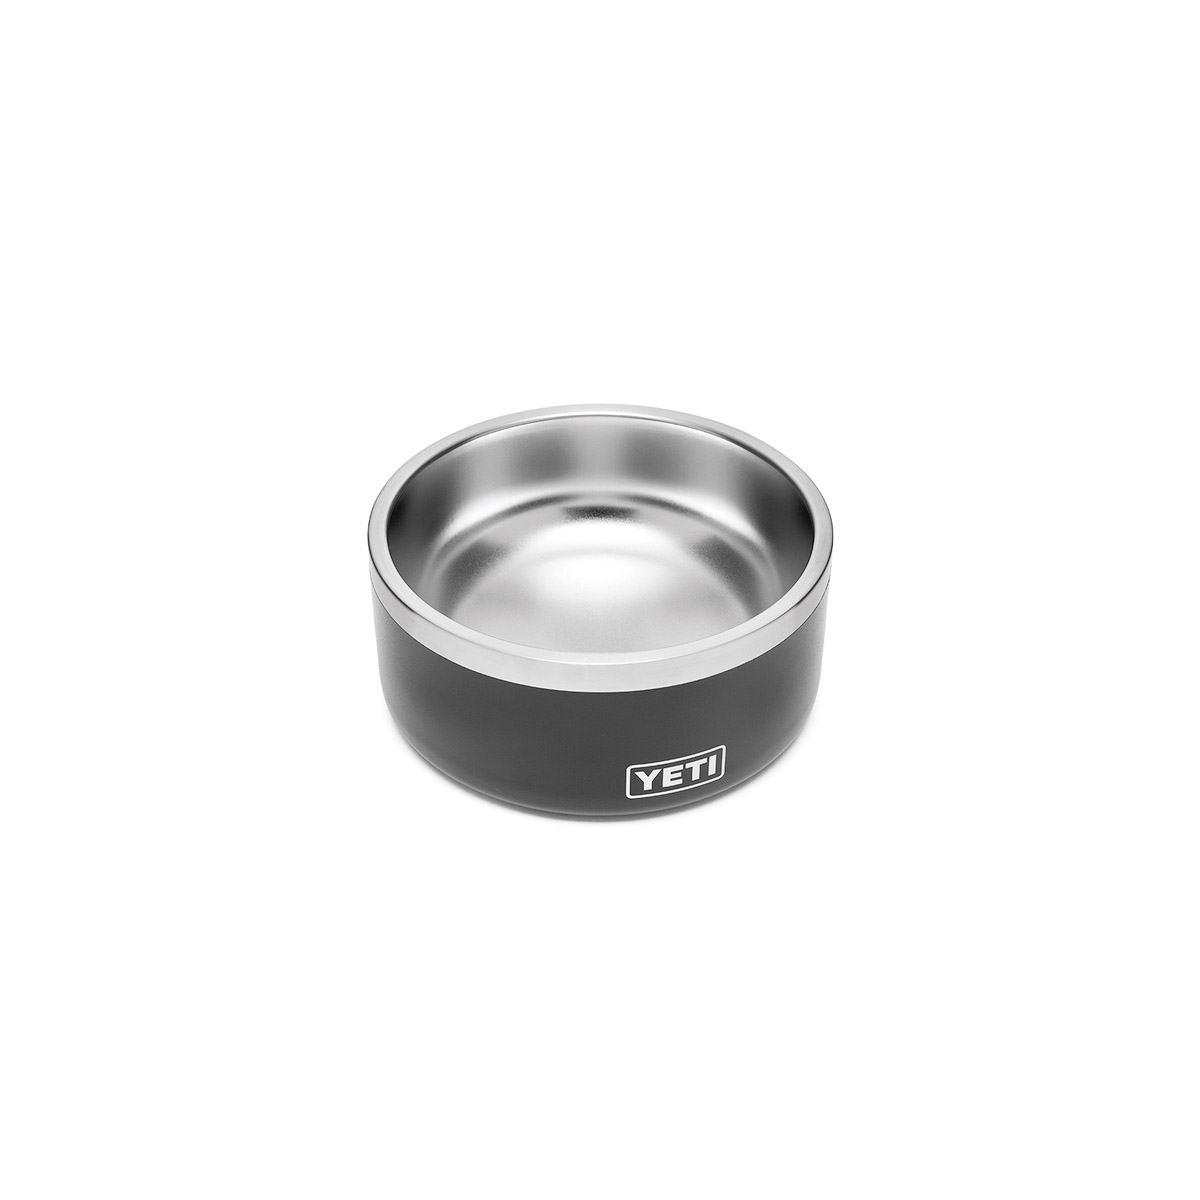 YETI Boomer 21071499983 Dog Bowl, 6-4/5 in Dia, 4 Cup Volume, Stainless Steel, River Green - 3